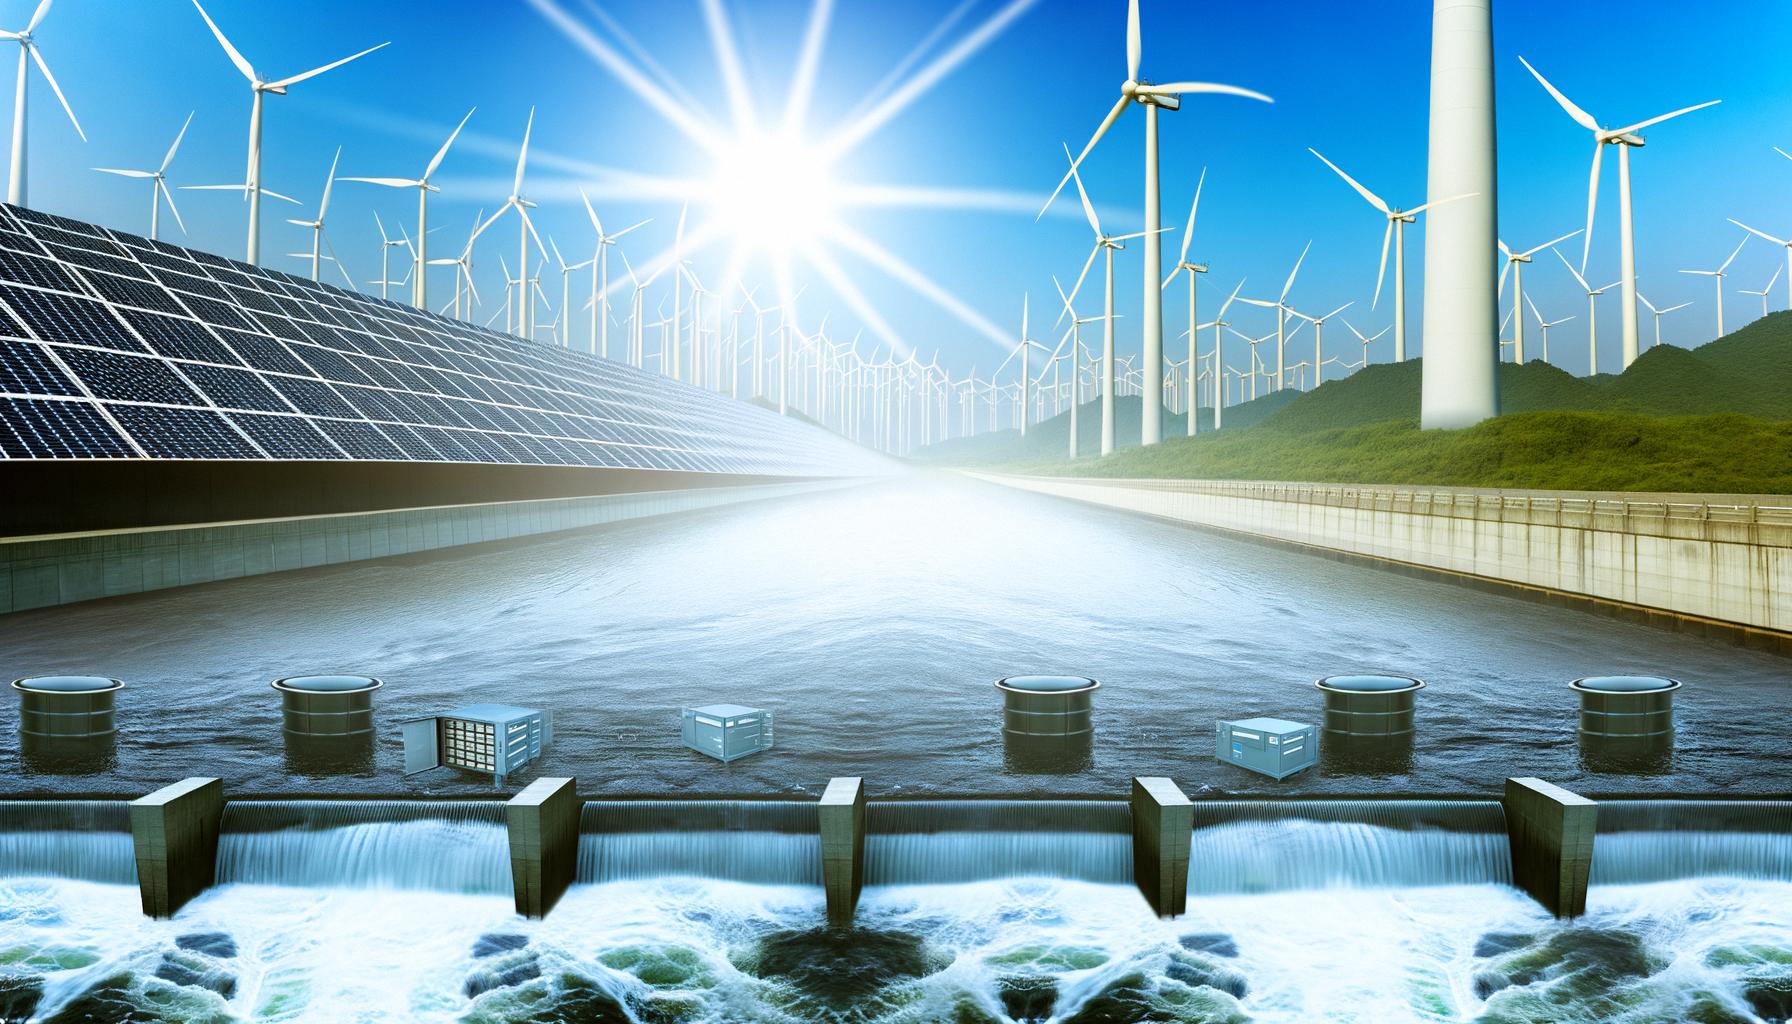 Renewable energy is becoming more integrated globally.